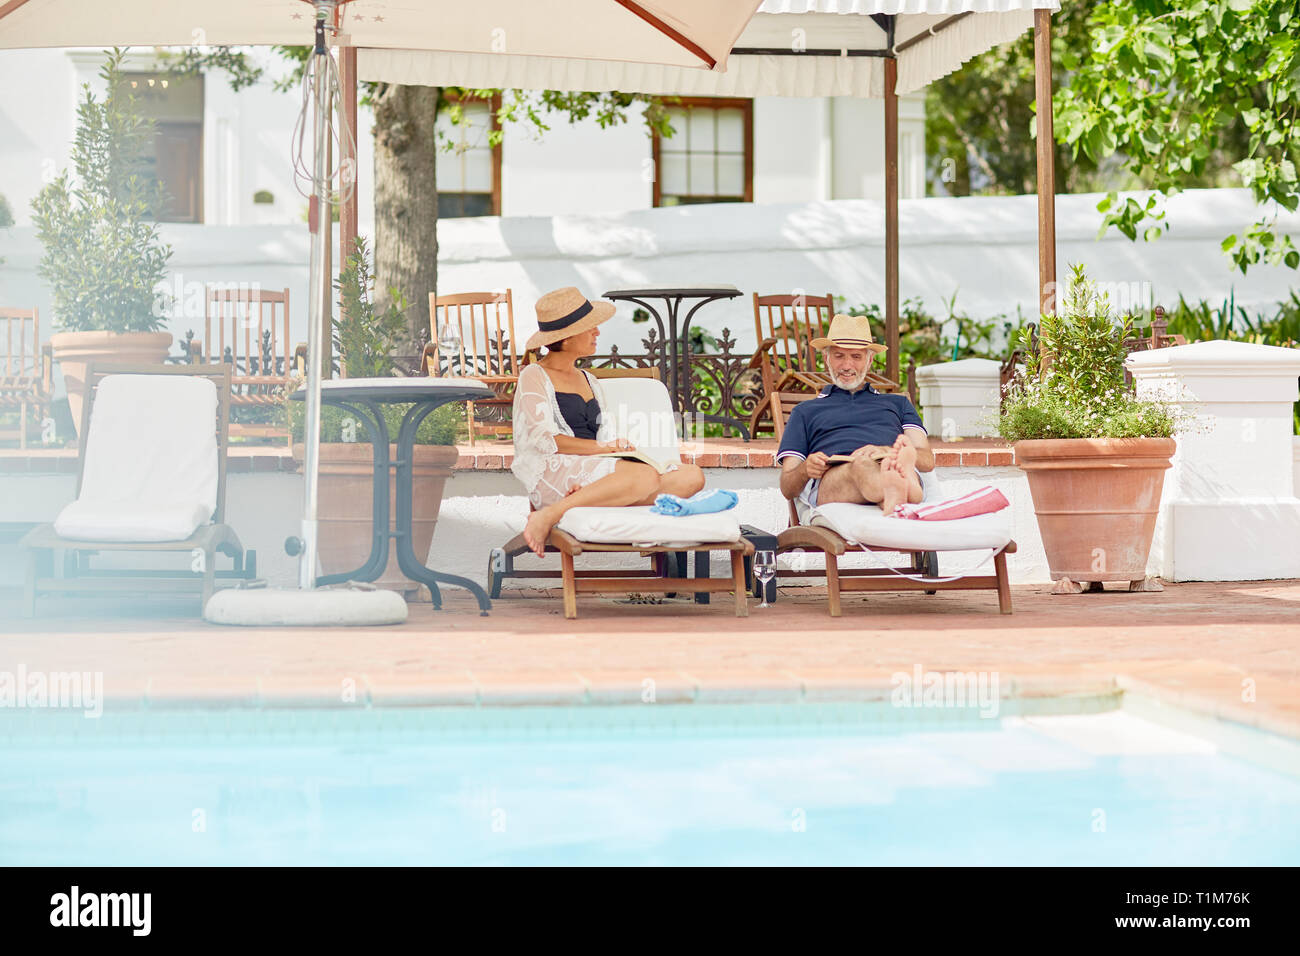 Young couple relaxing on lounge chairs at poolside resort Banque D'Images